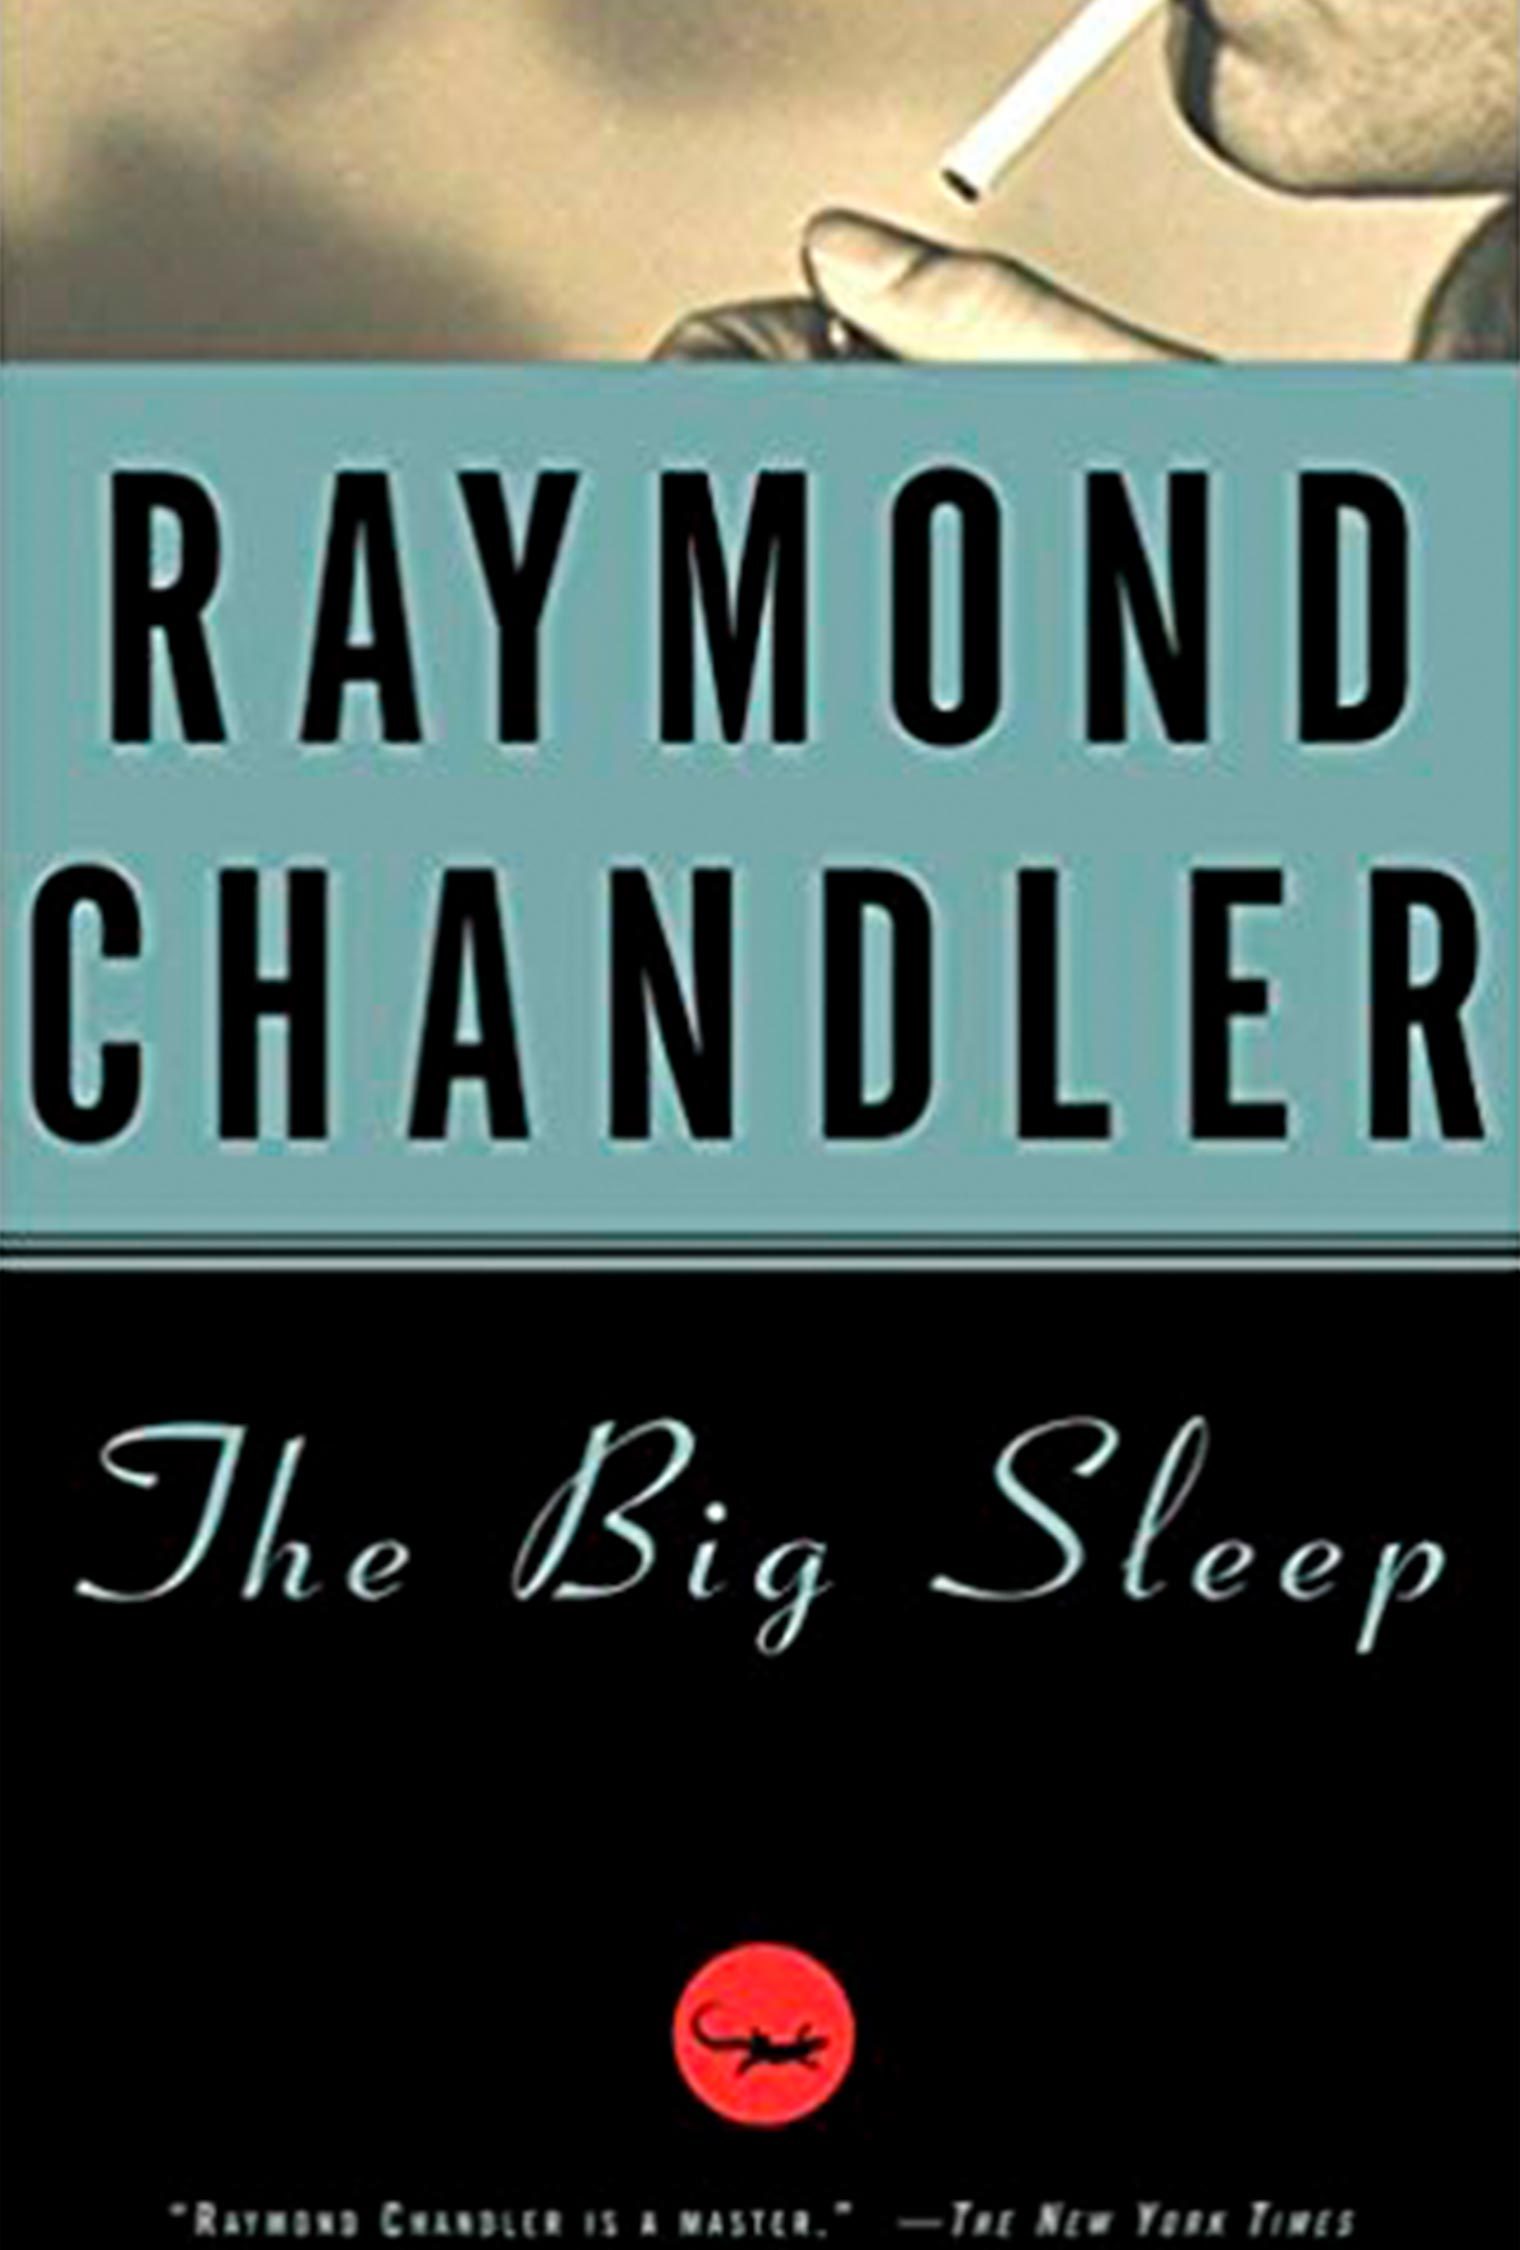 what is the big sleep book about